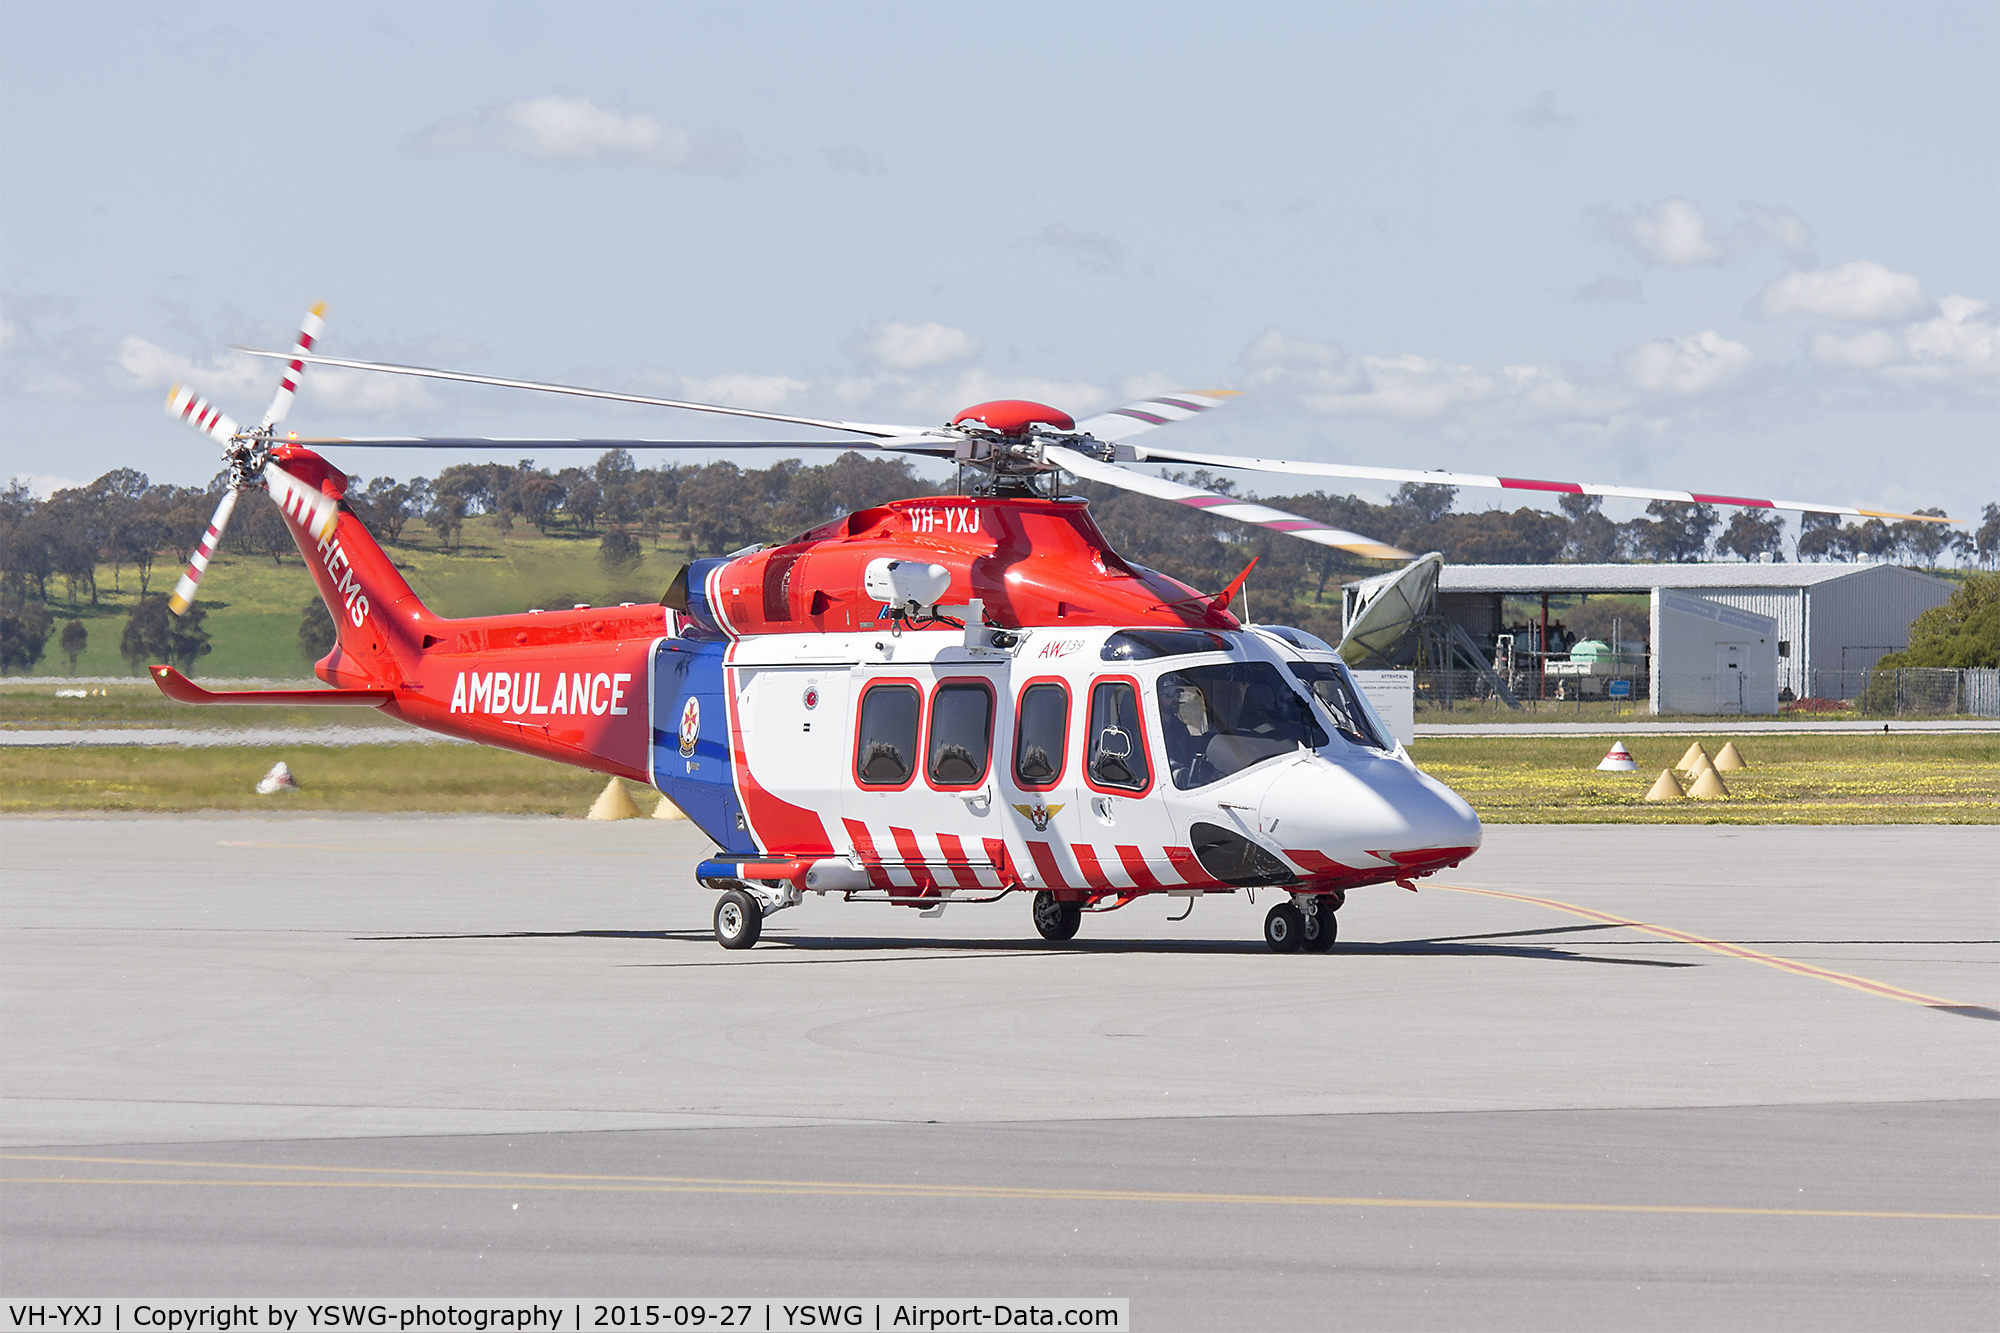 VH-YXJ, 2015 AgustaWestland AW-139 C/N 31620, Australian Helicopters (VH-YXJ), operated for Ambulance Victoria, AgustaWestland AW139 taxiing at Wagga Wagga Airport.